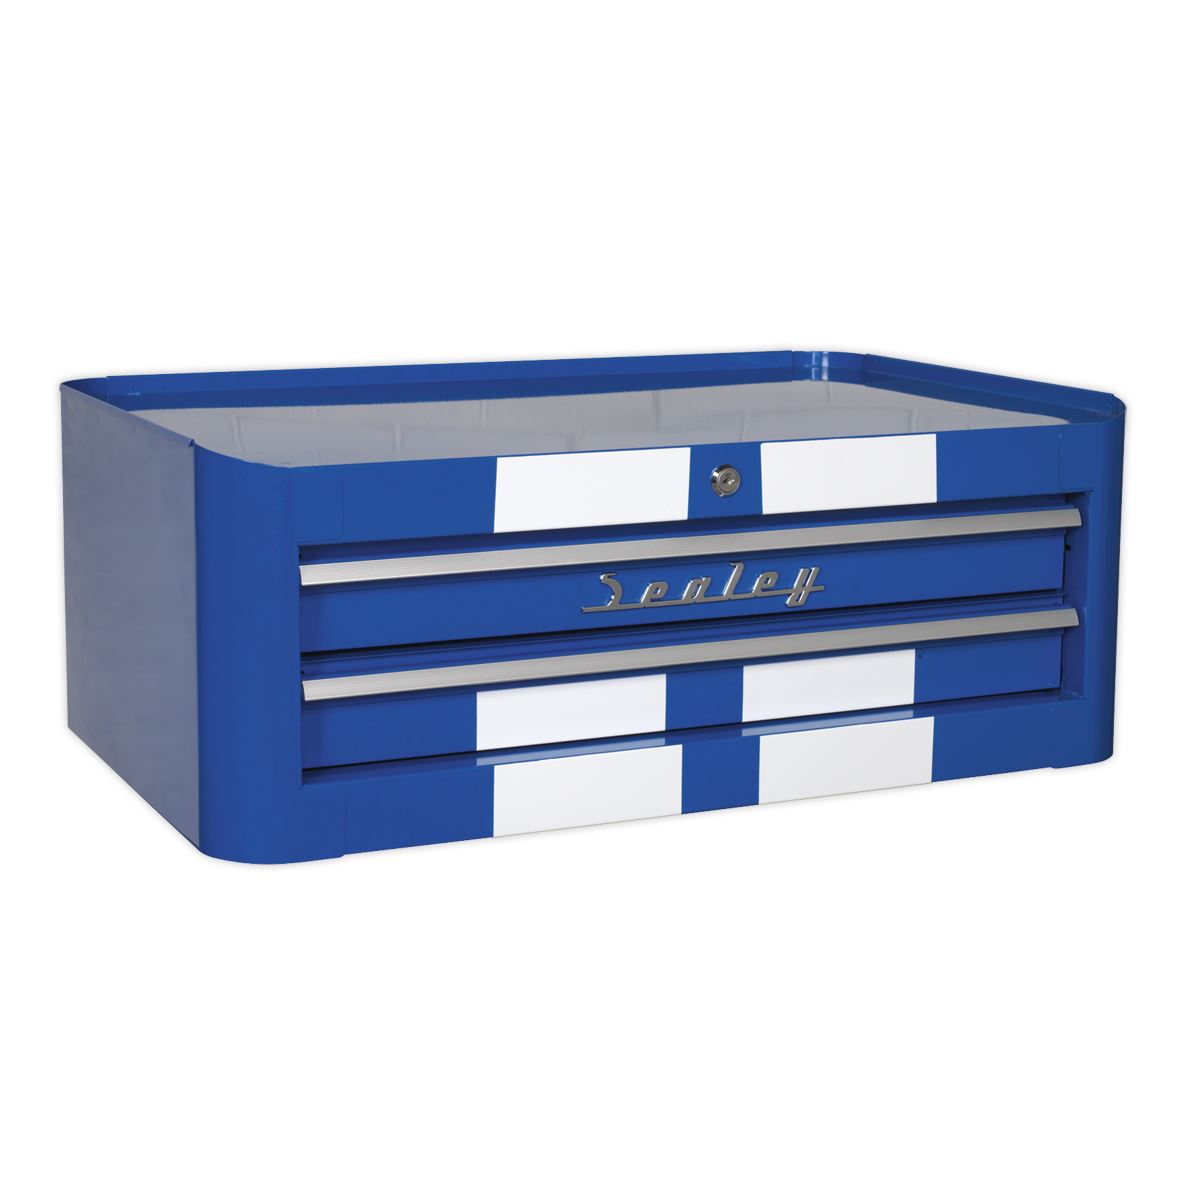 Sealey Premier Mid-Box Tool Chest 2 Drawer Retro Style - Blue with White Stripes